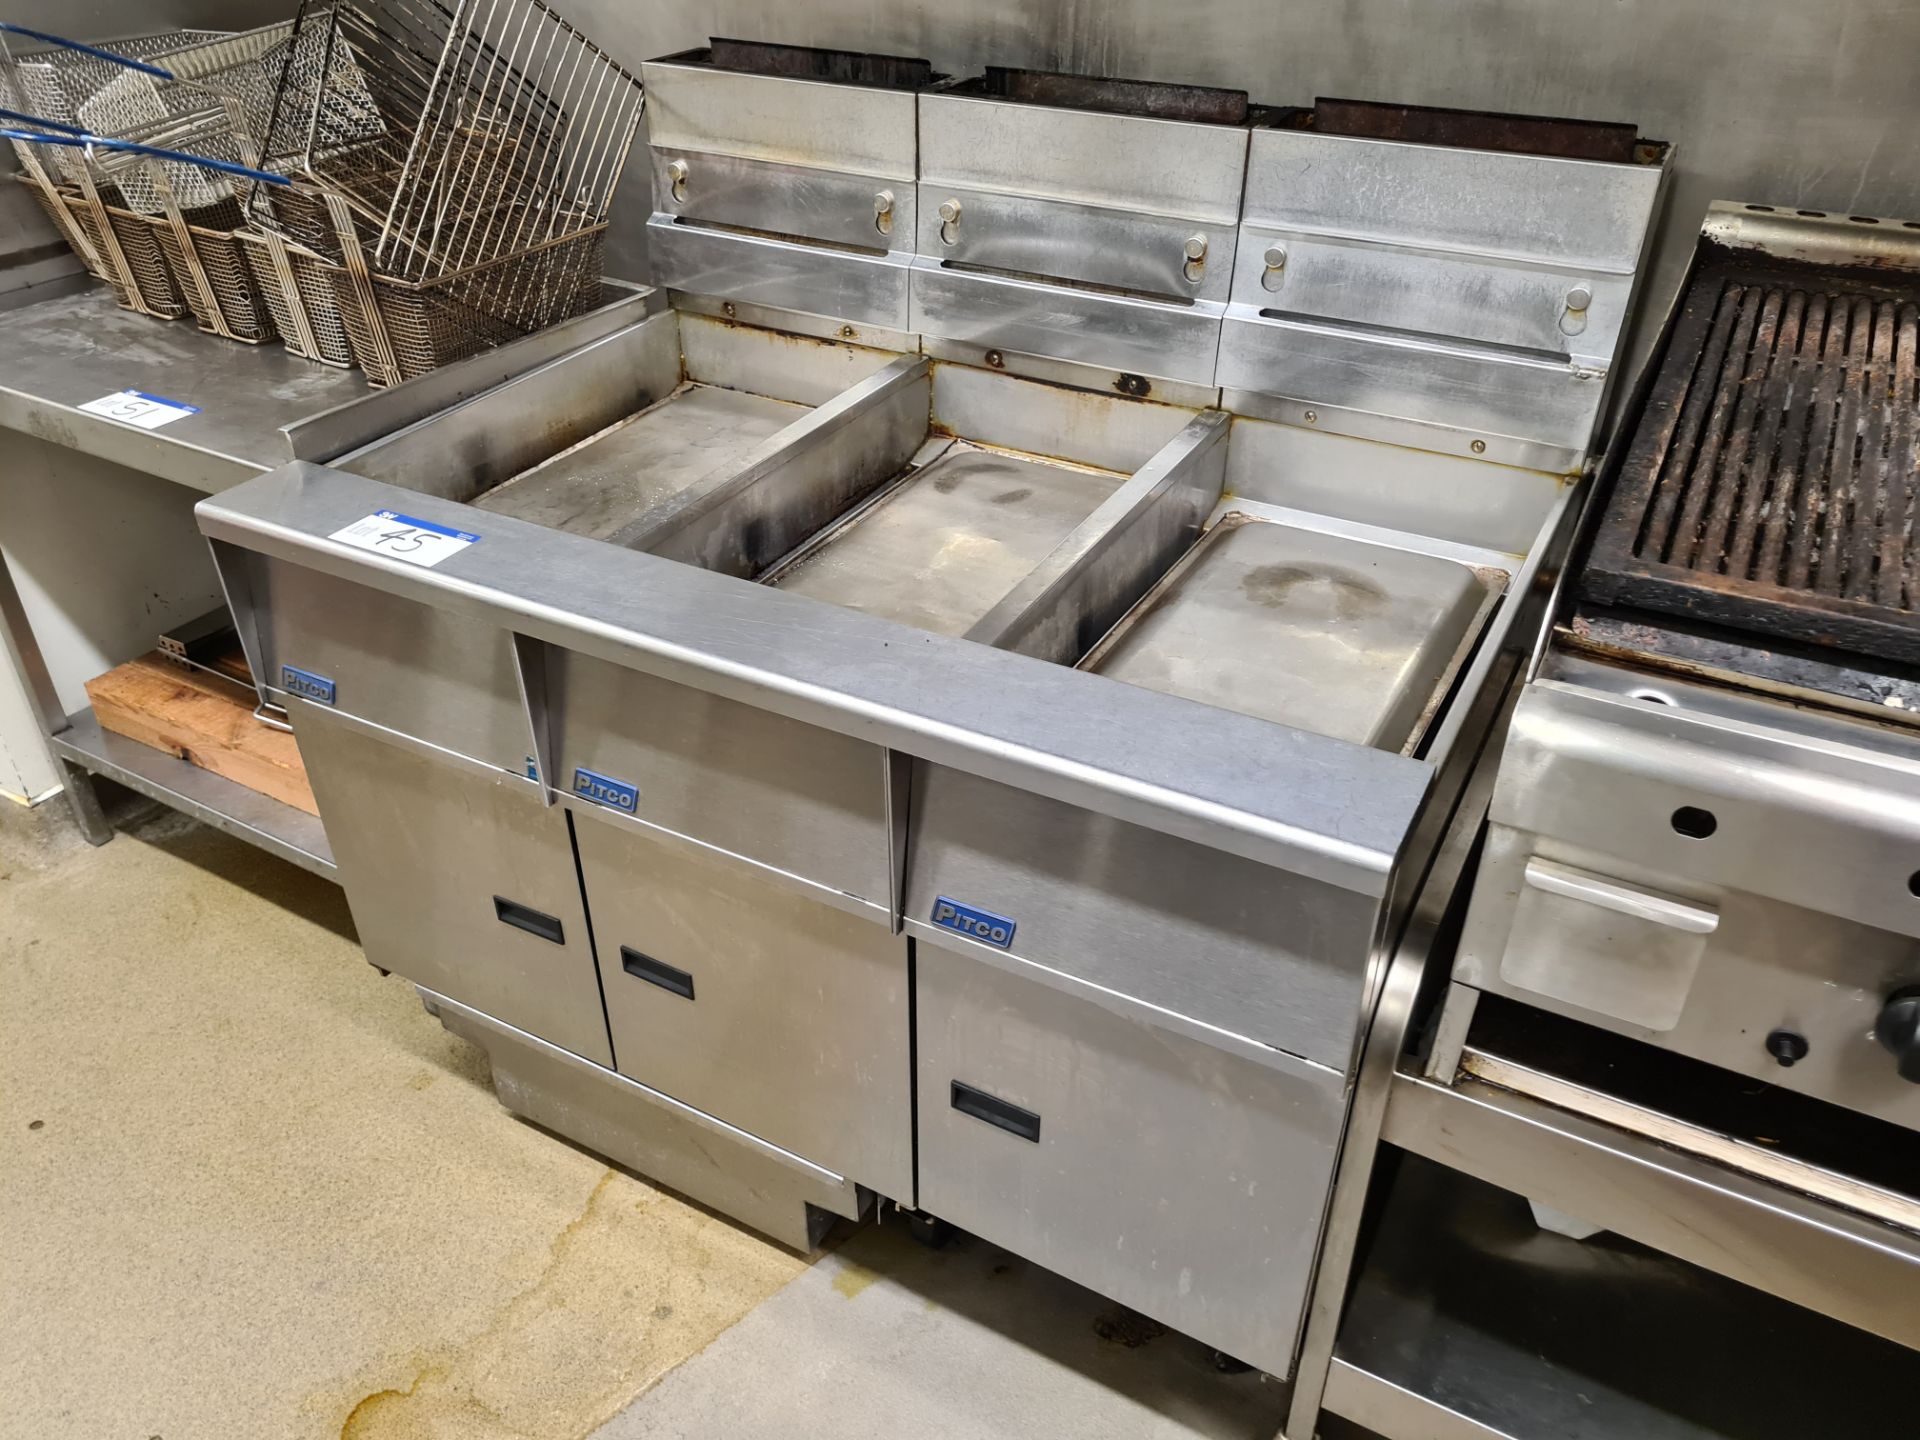 PITCO Stainless Steel Triple Mobile Deep Fat Fryer c/w Six Frying Baskets, Approx. 1.2m (L) x 0. - Image 3 of 7